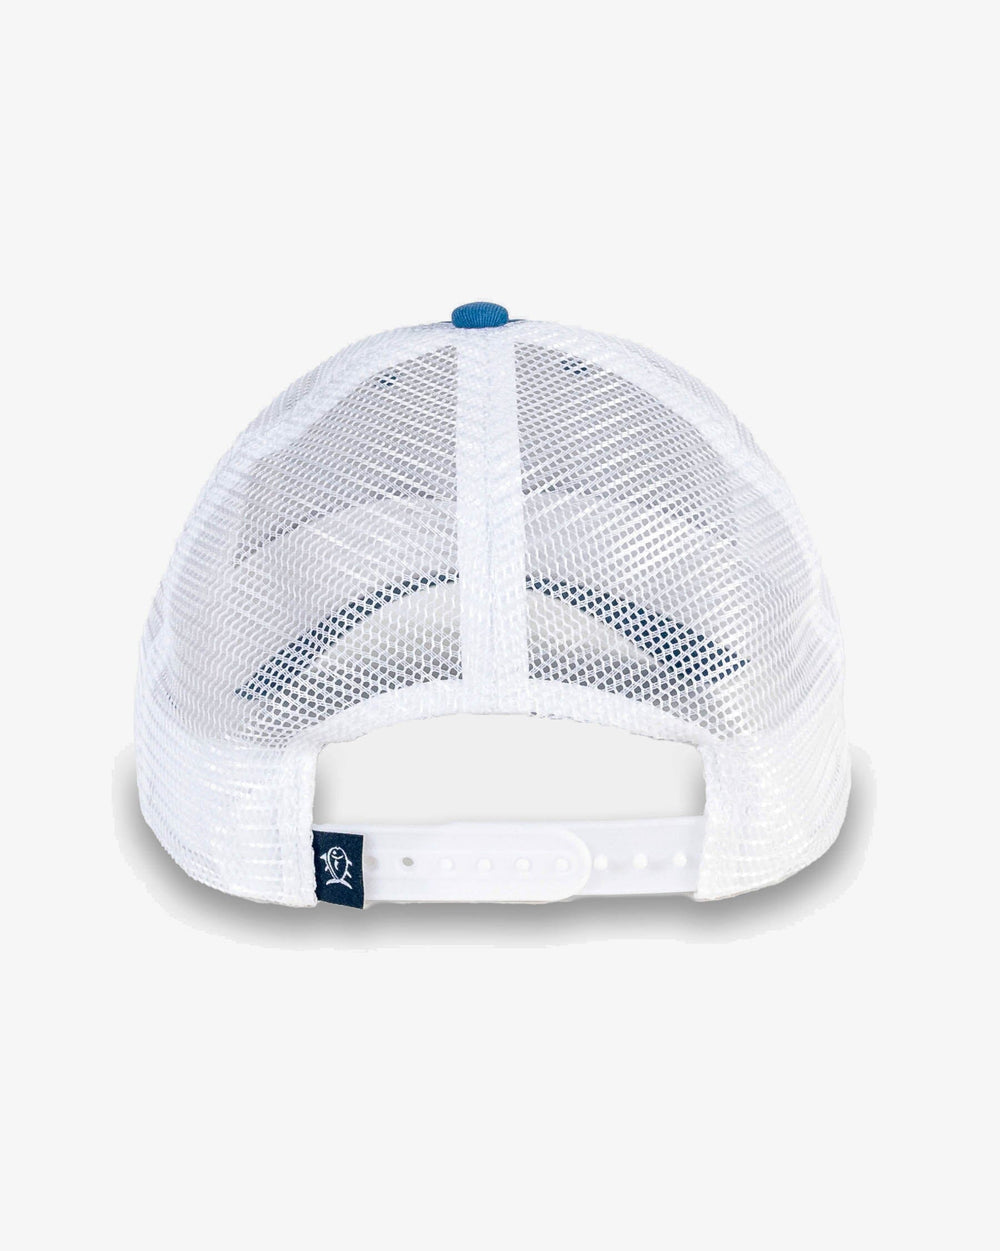 The back view of the Southern Tide Coastal Expedition Patch Trucker Hat by Southern Tide - Dark Blue